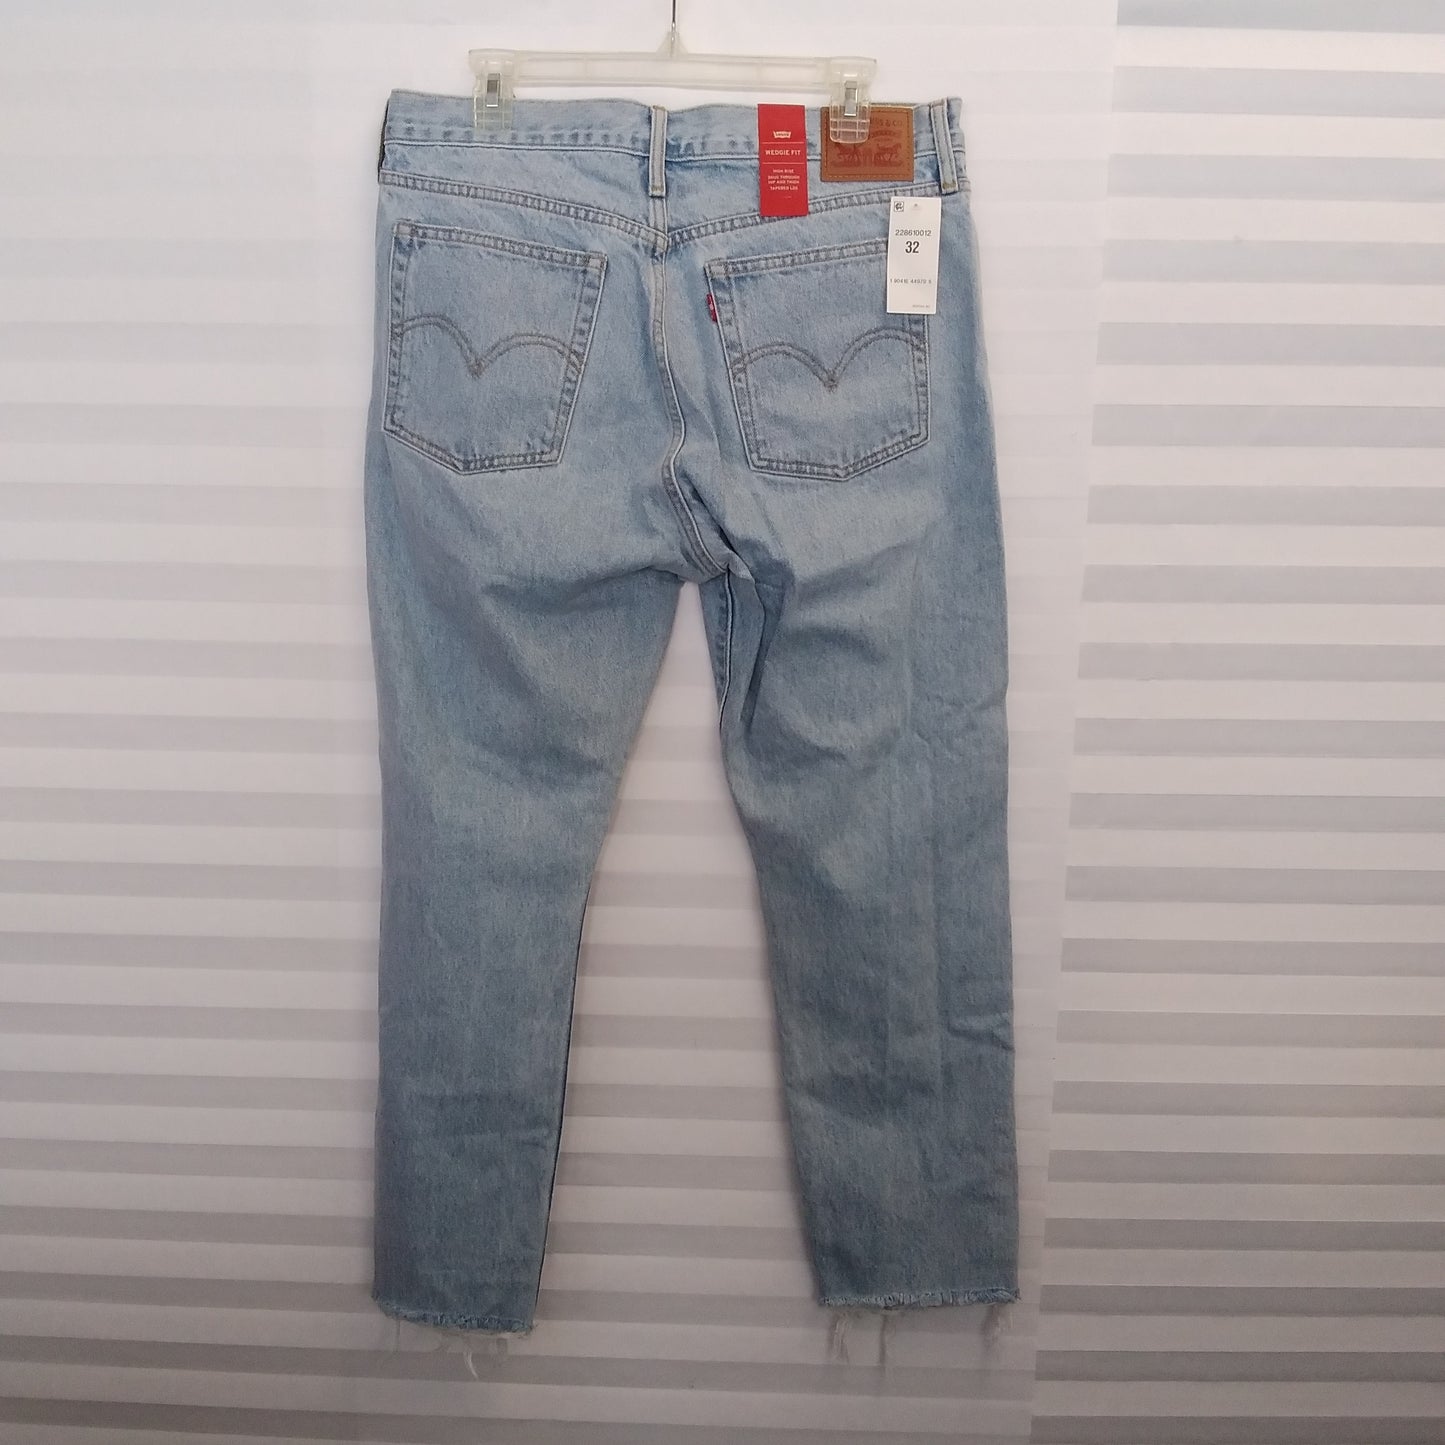 NWT - Levi's Wedgie Fit Distressed High Rise Button Fly Denim Jeans - Size 32